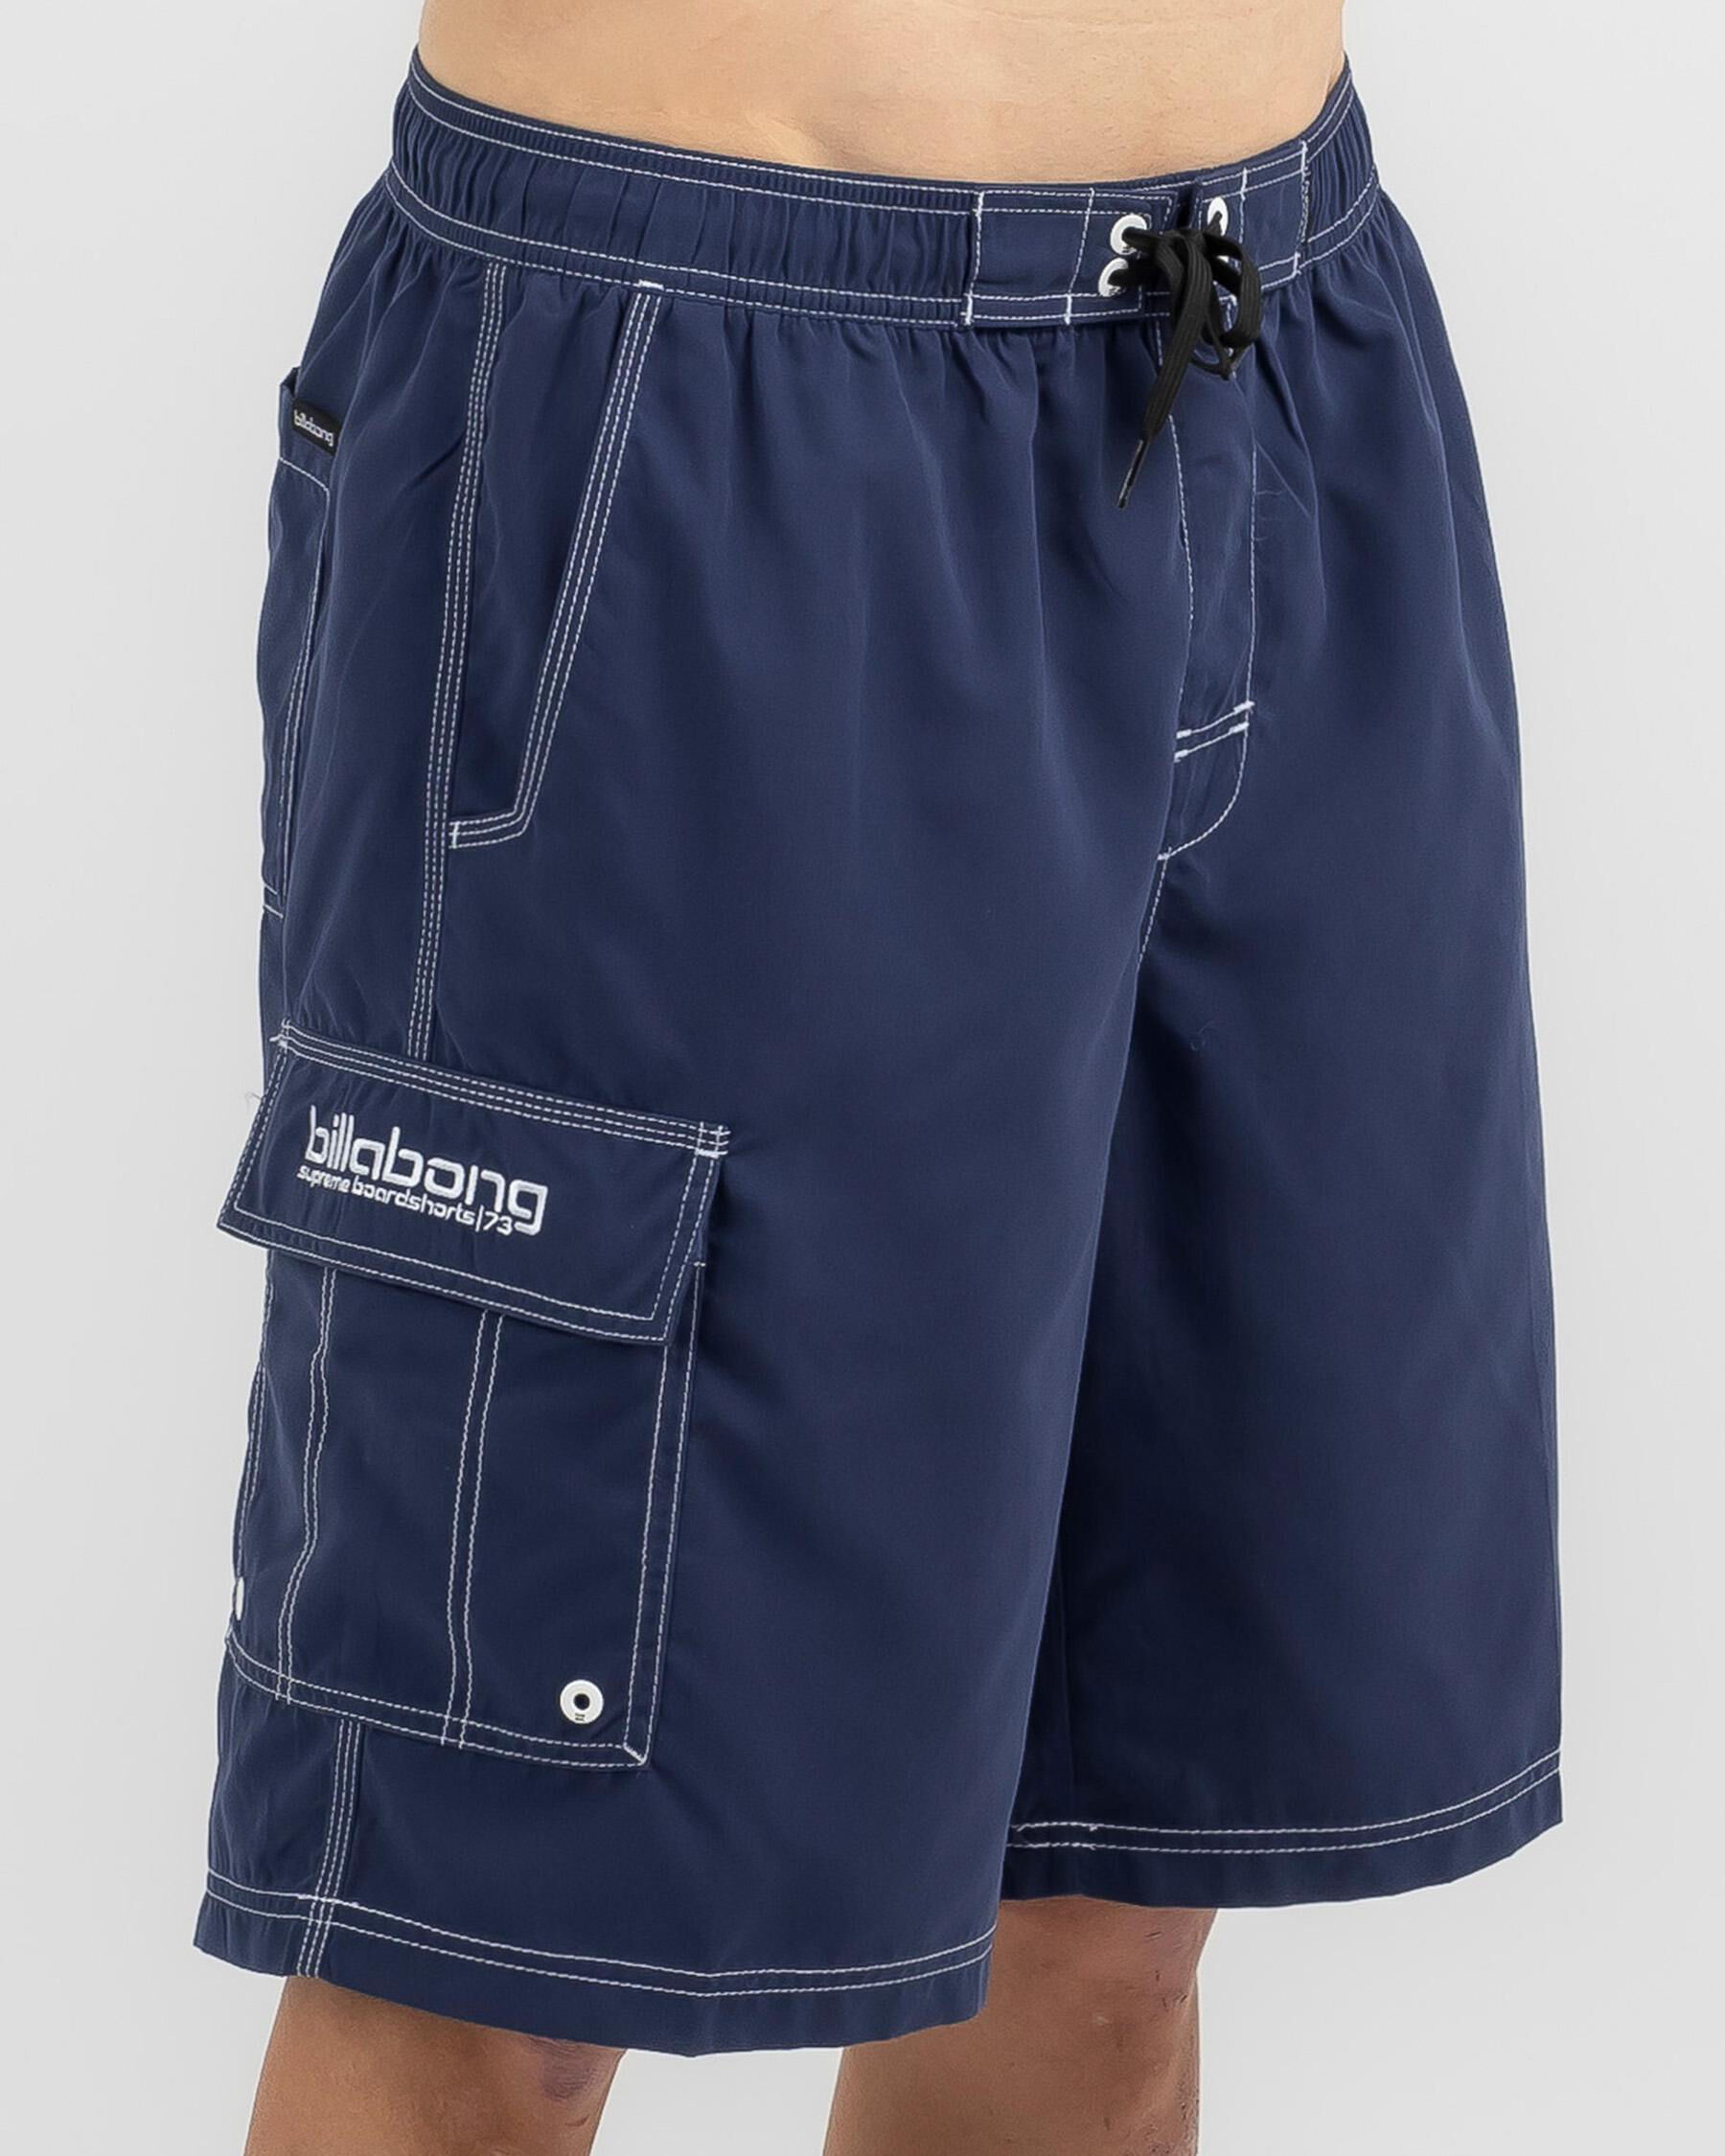 Shop Mens Shorts Online - Fast Shipping & Easy Returns - City